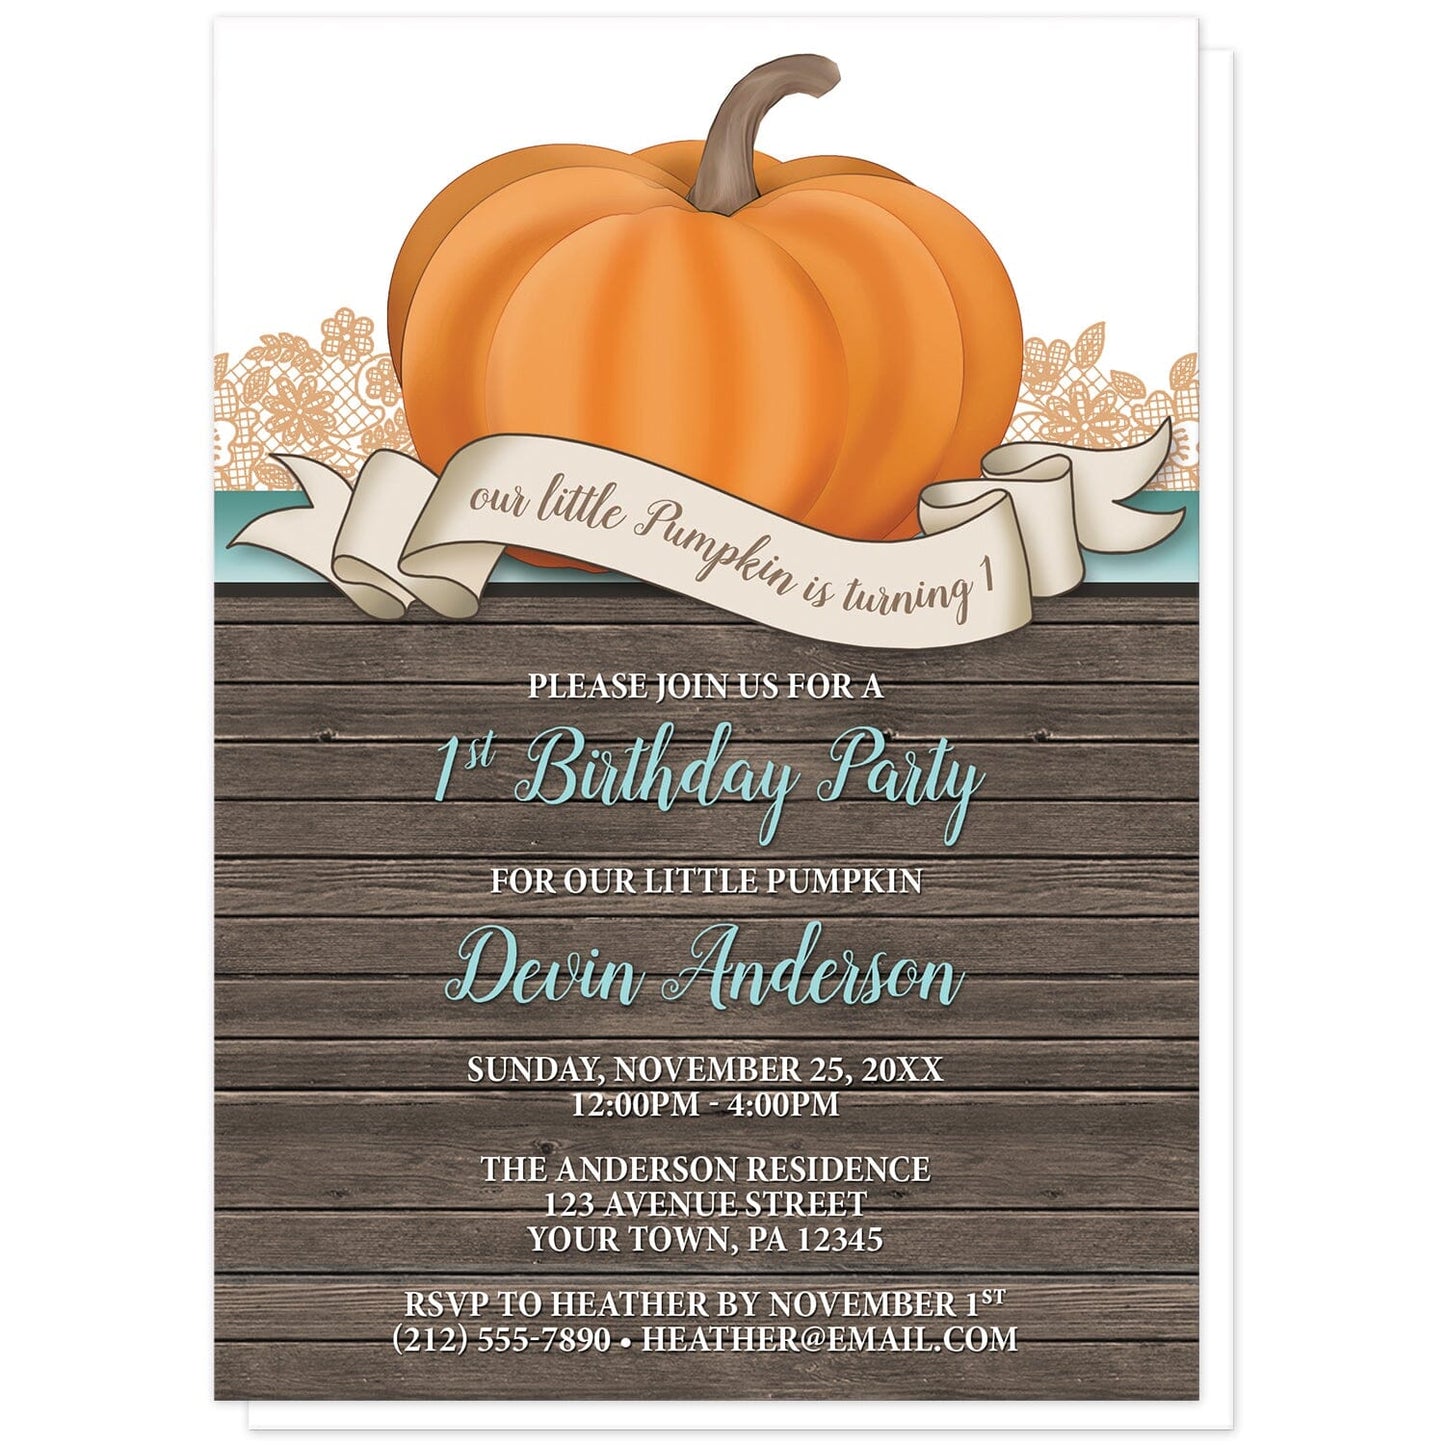 Rustic Orange Teal Pumpkin 1st Birthday Invitations at Artistically Invited. Rustic orange teal pumpkin 1st birthday invitations with an illustration of an orange pumpkin over wood and ribbon banner that reads: "our little pumpkin is turning 1". This cute pumpkin drawing is set on a horizontal teal stripe with orange lace behind it. The personalized party information you provide will be custom printed in teal and white over a country brown wood background illustration below the pumpkin.